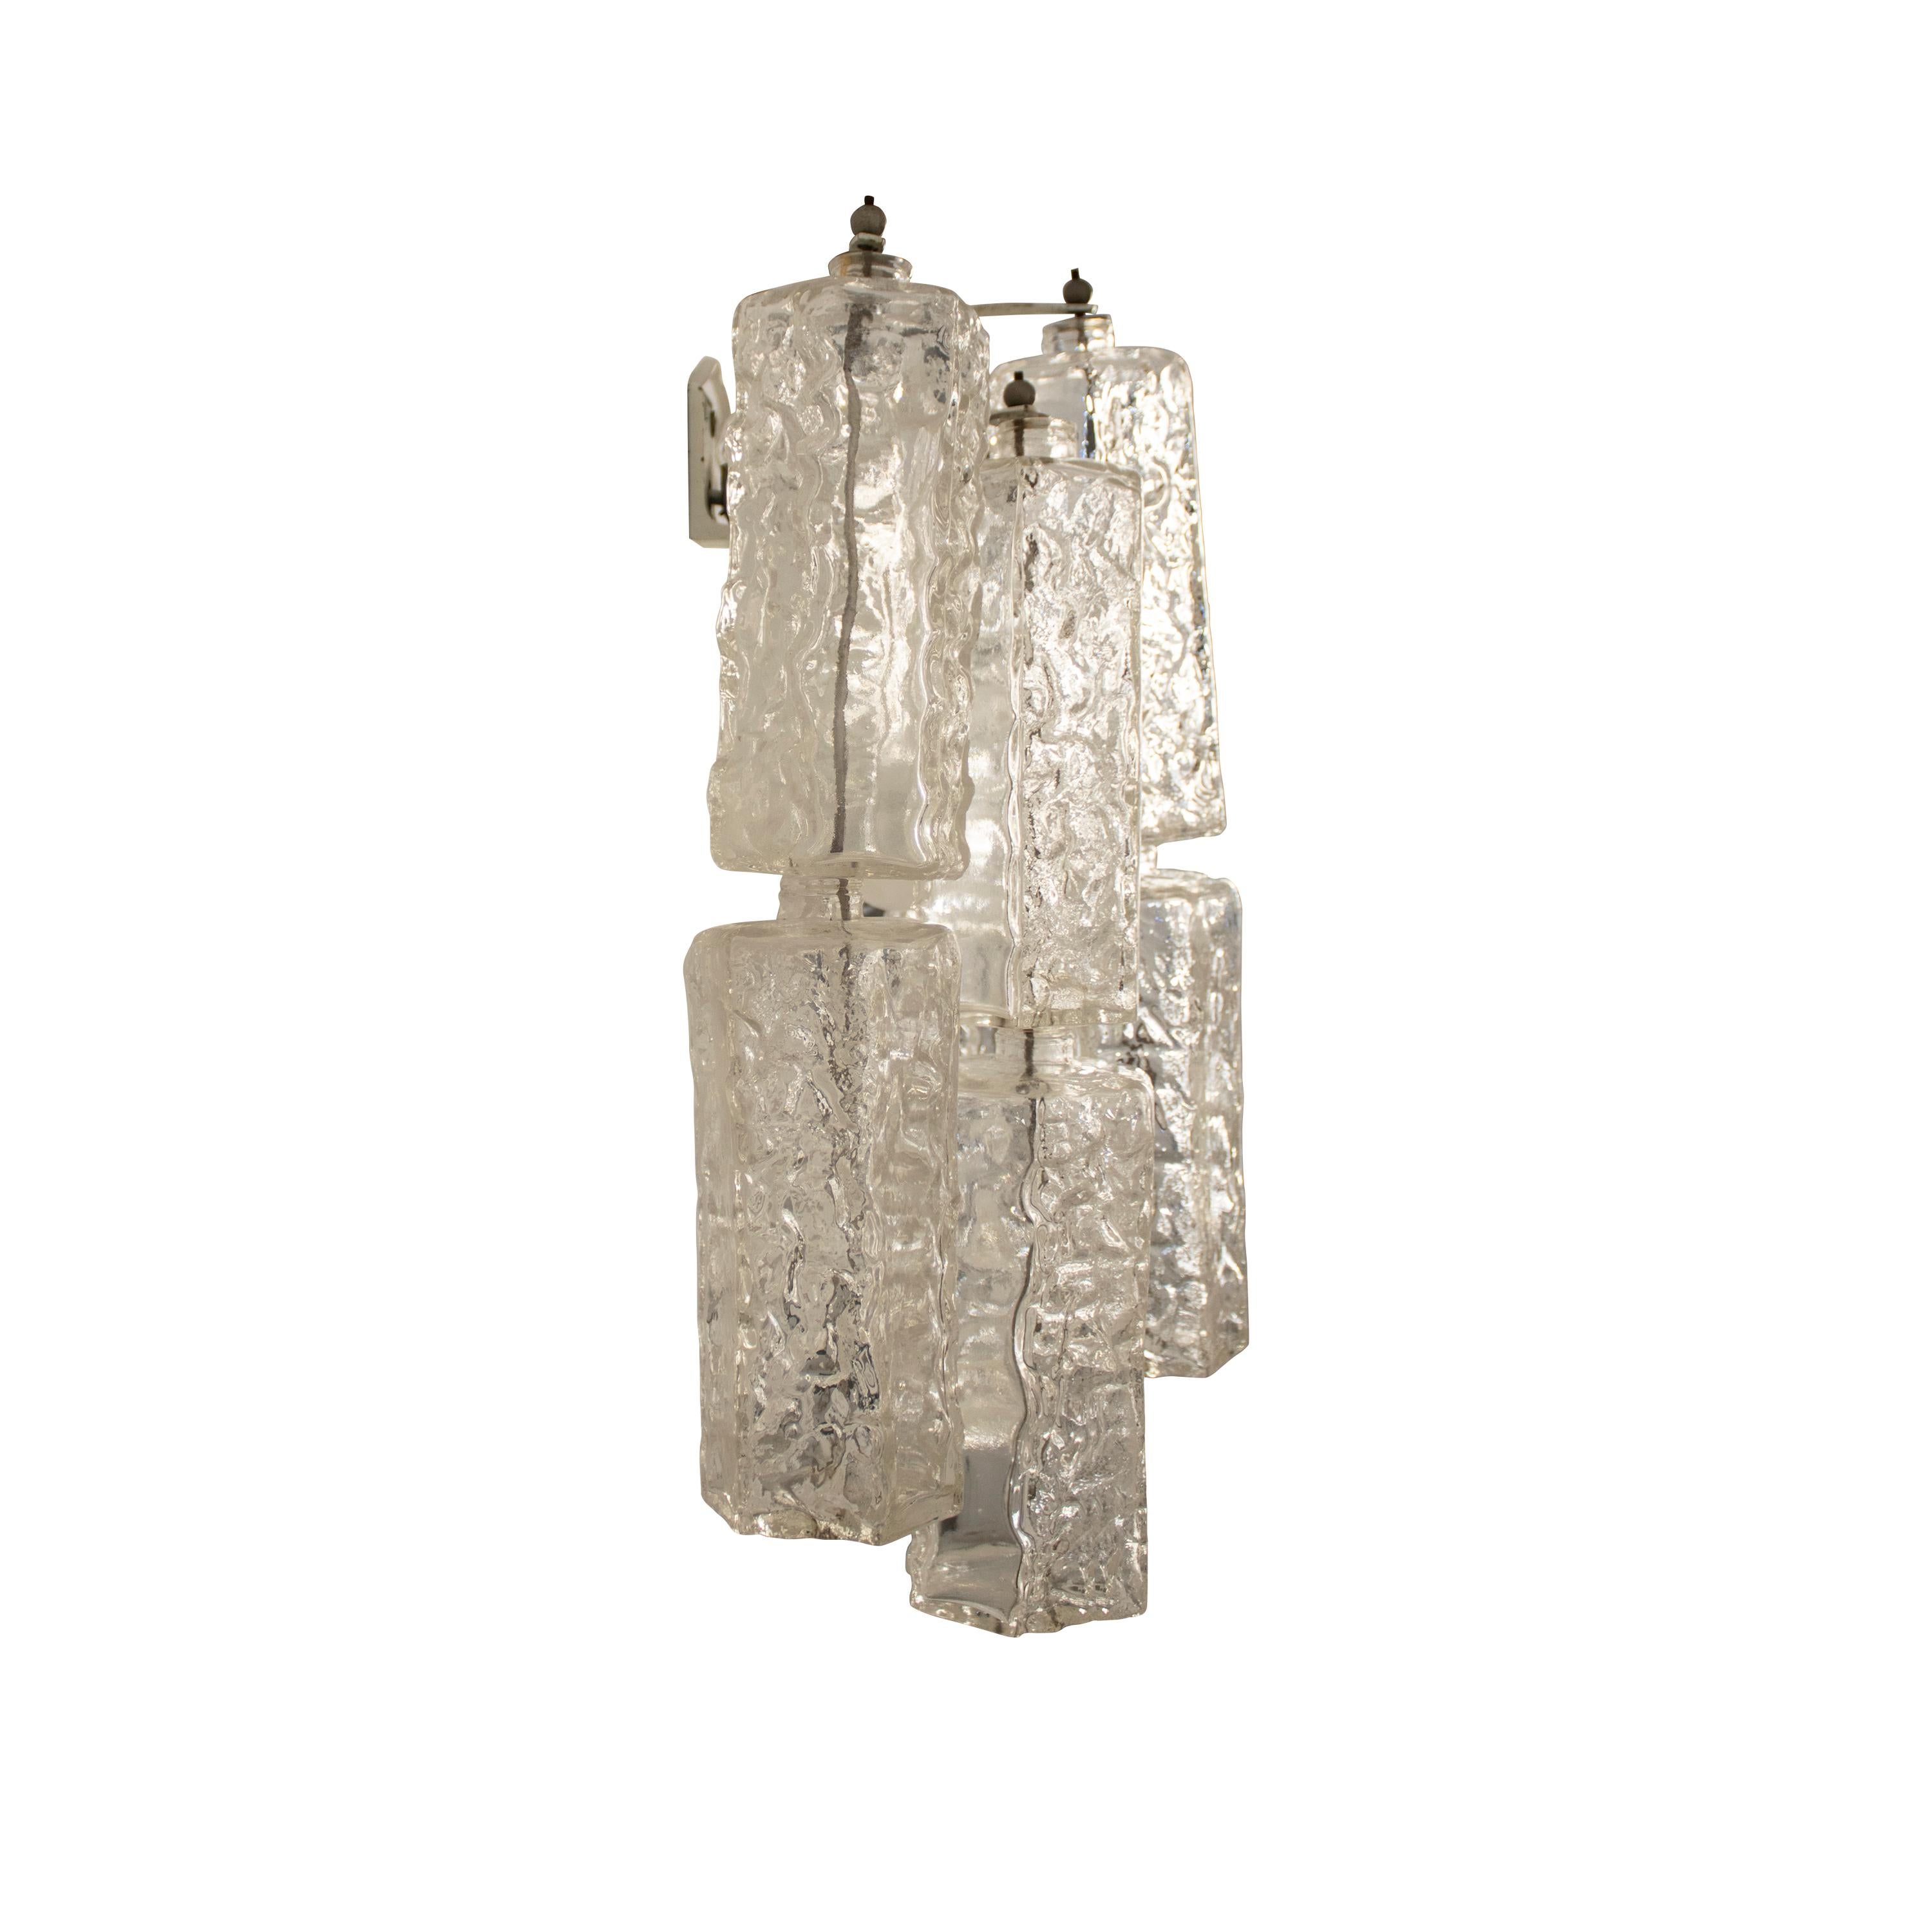 Lacquered Mid-Century Modern Hendcrafted Venini Glass Wall Light, Italy, 1960 For Sale